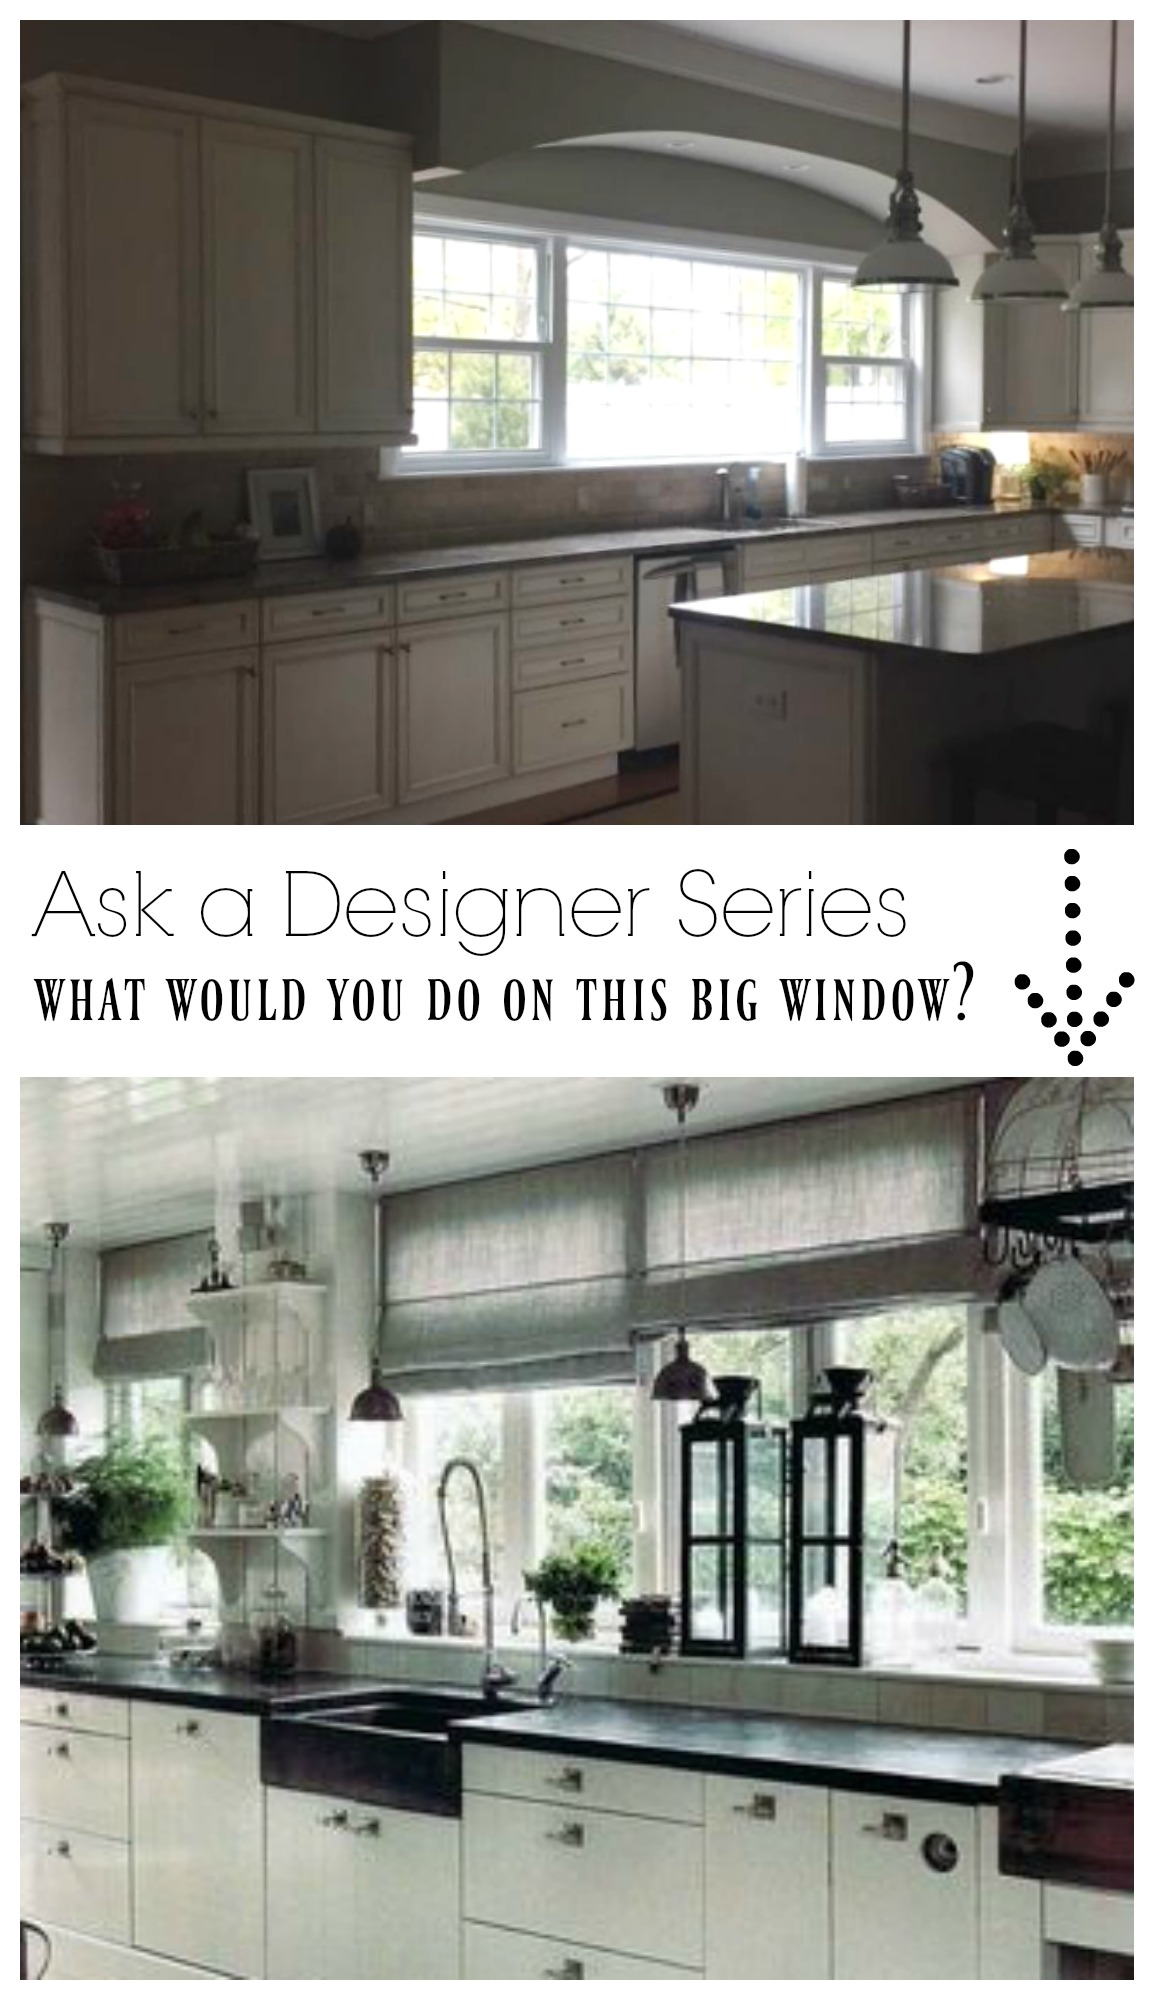 Ask a Designer Series- What would you do on this large Kitchen Window?